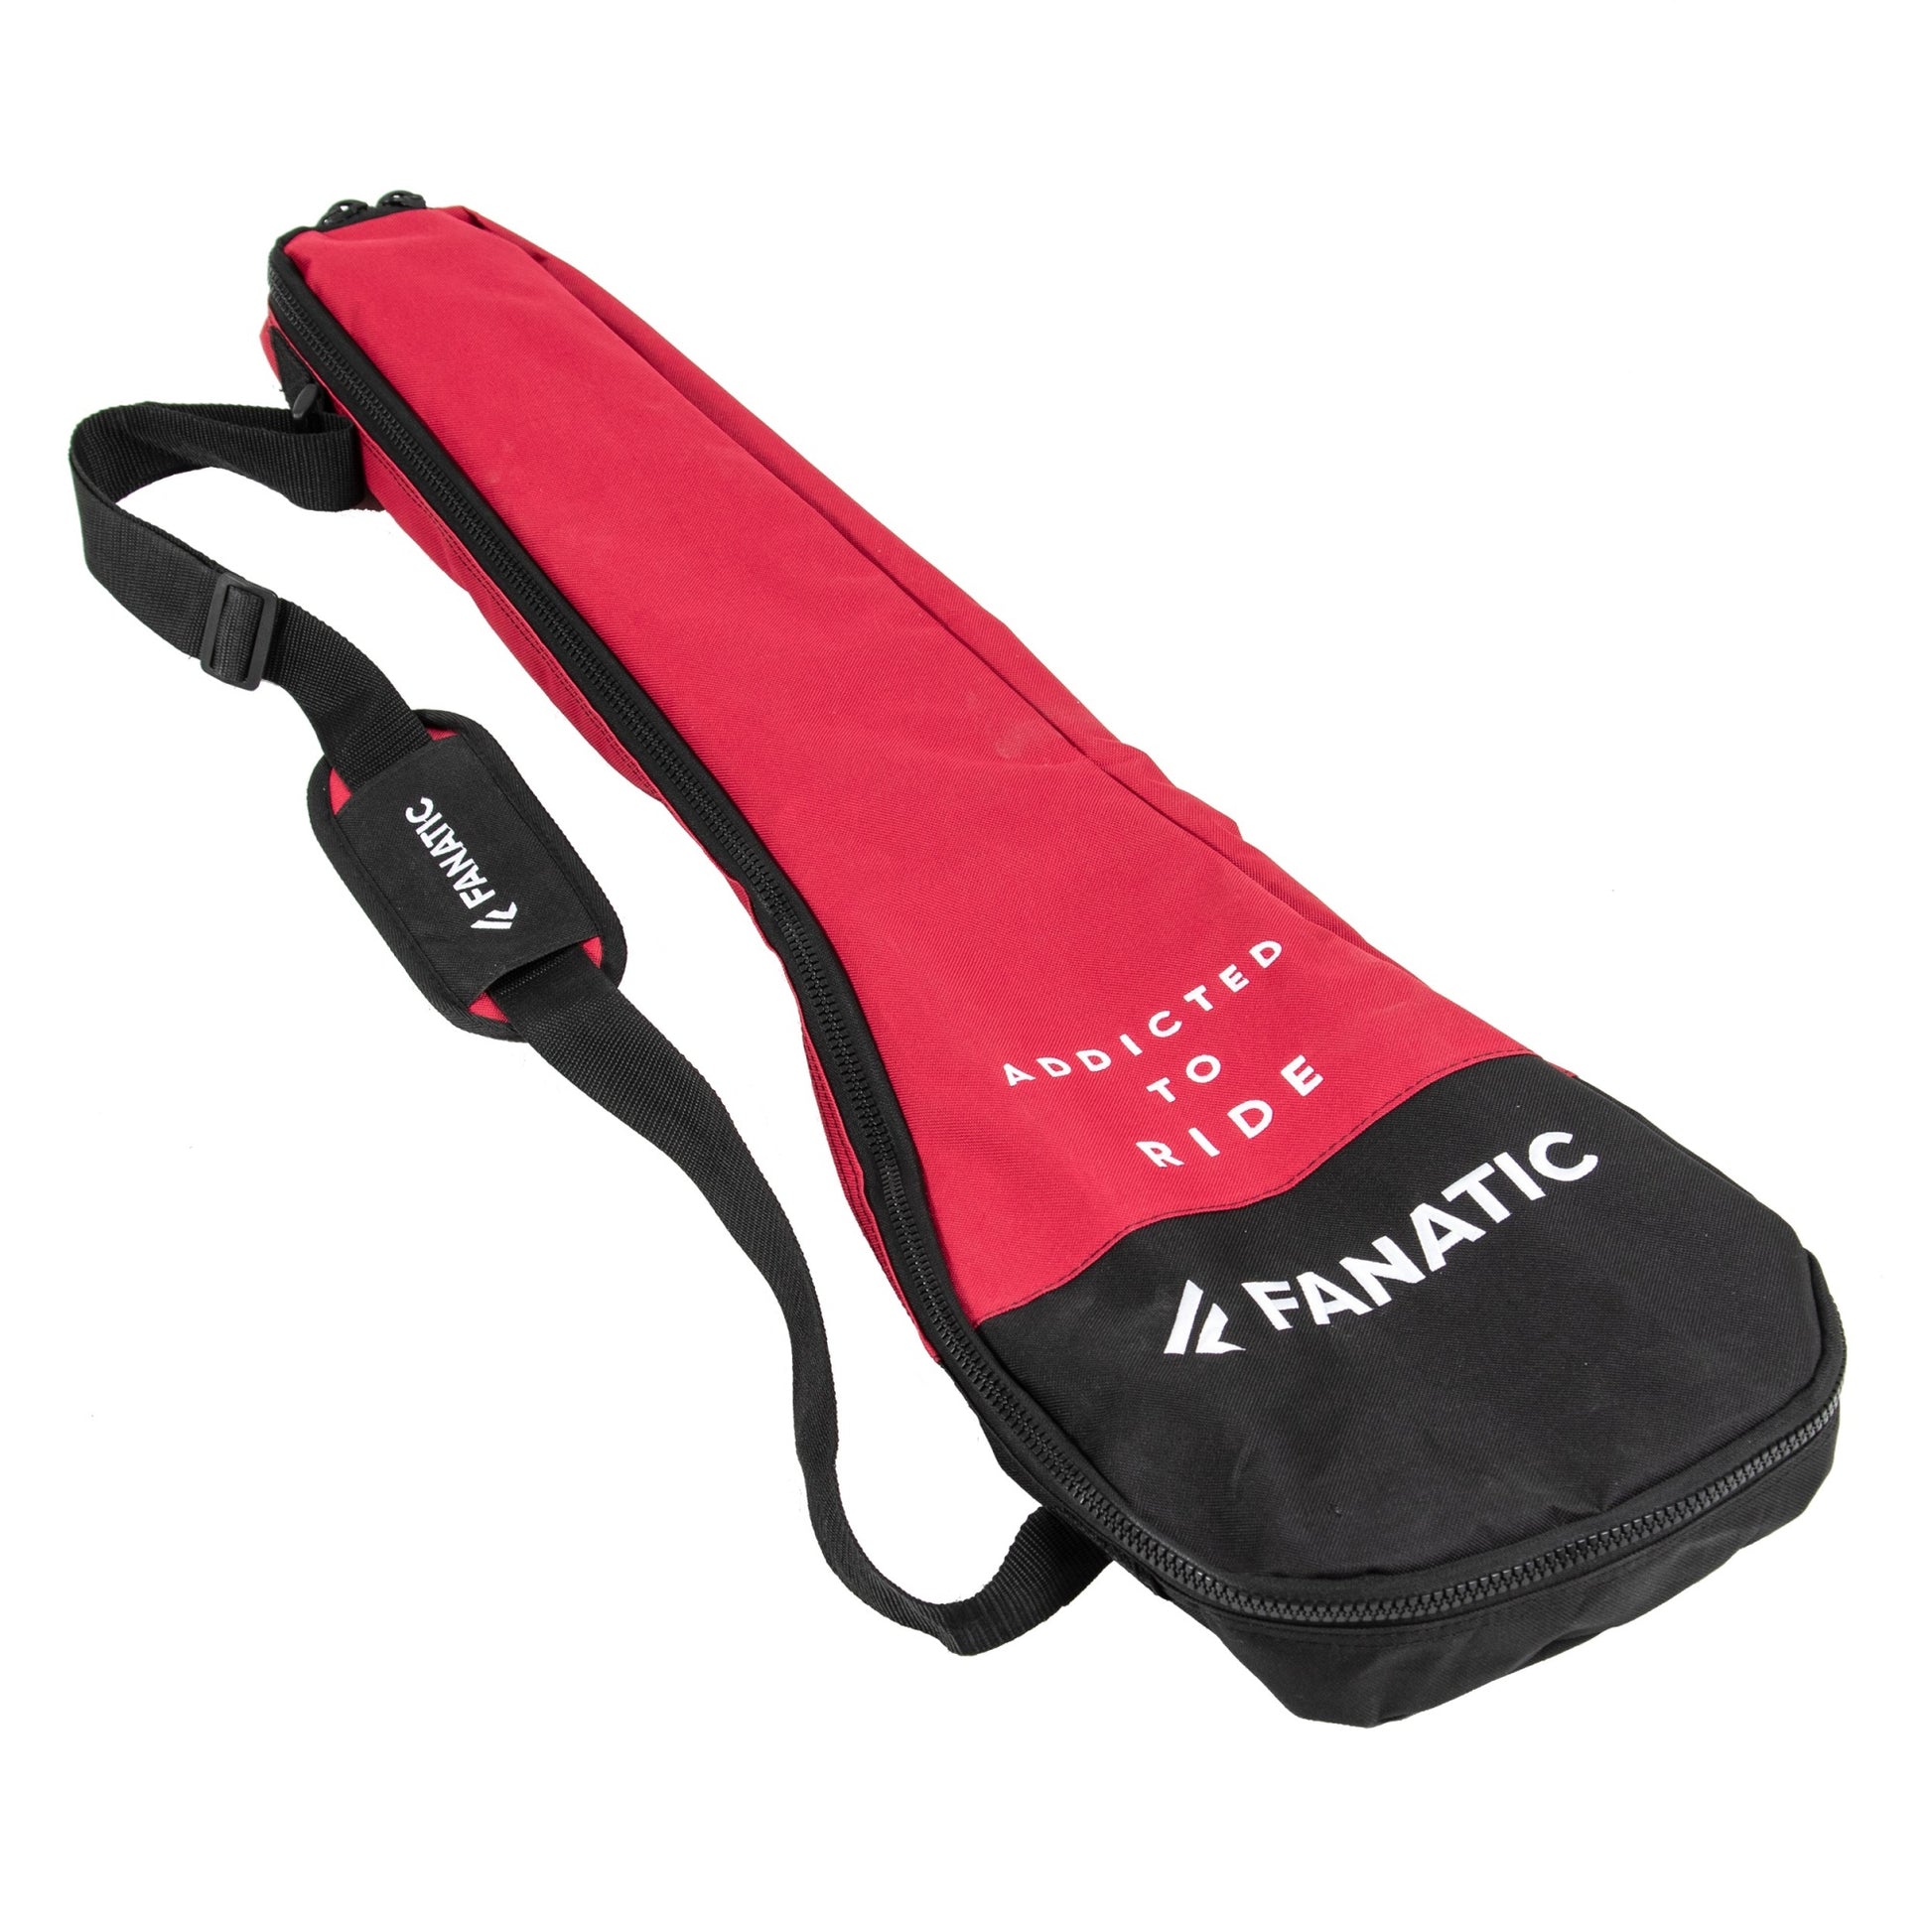 Fanatic Paddle Bag for 3pcs-Paddle – SUP Paddel Tasche